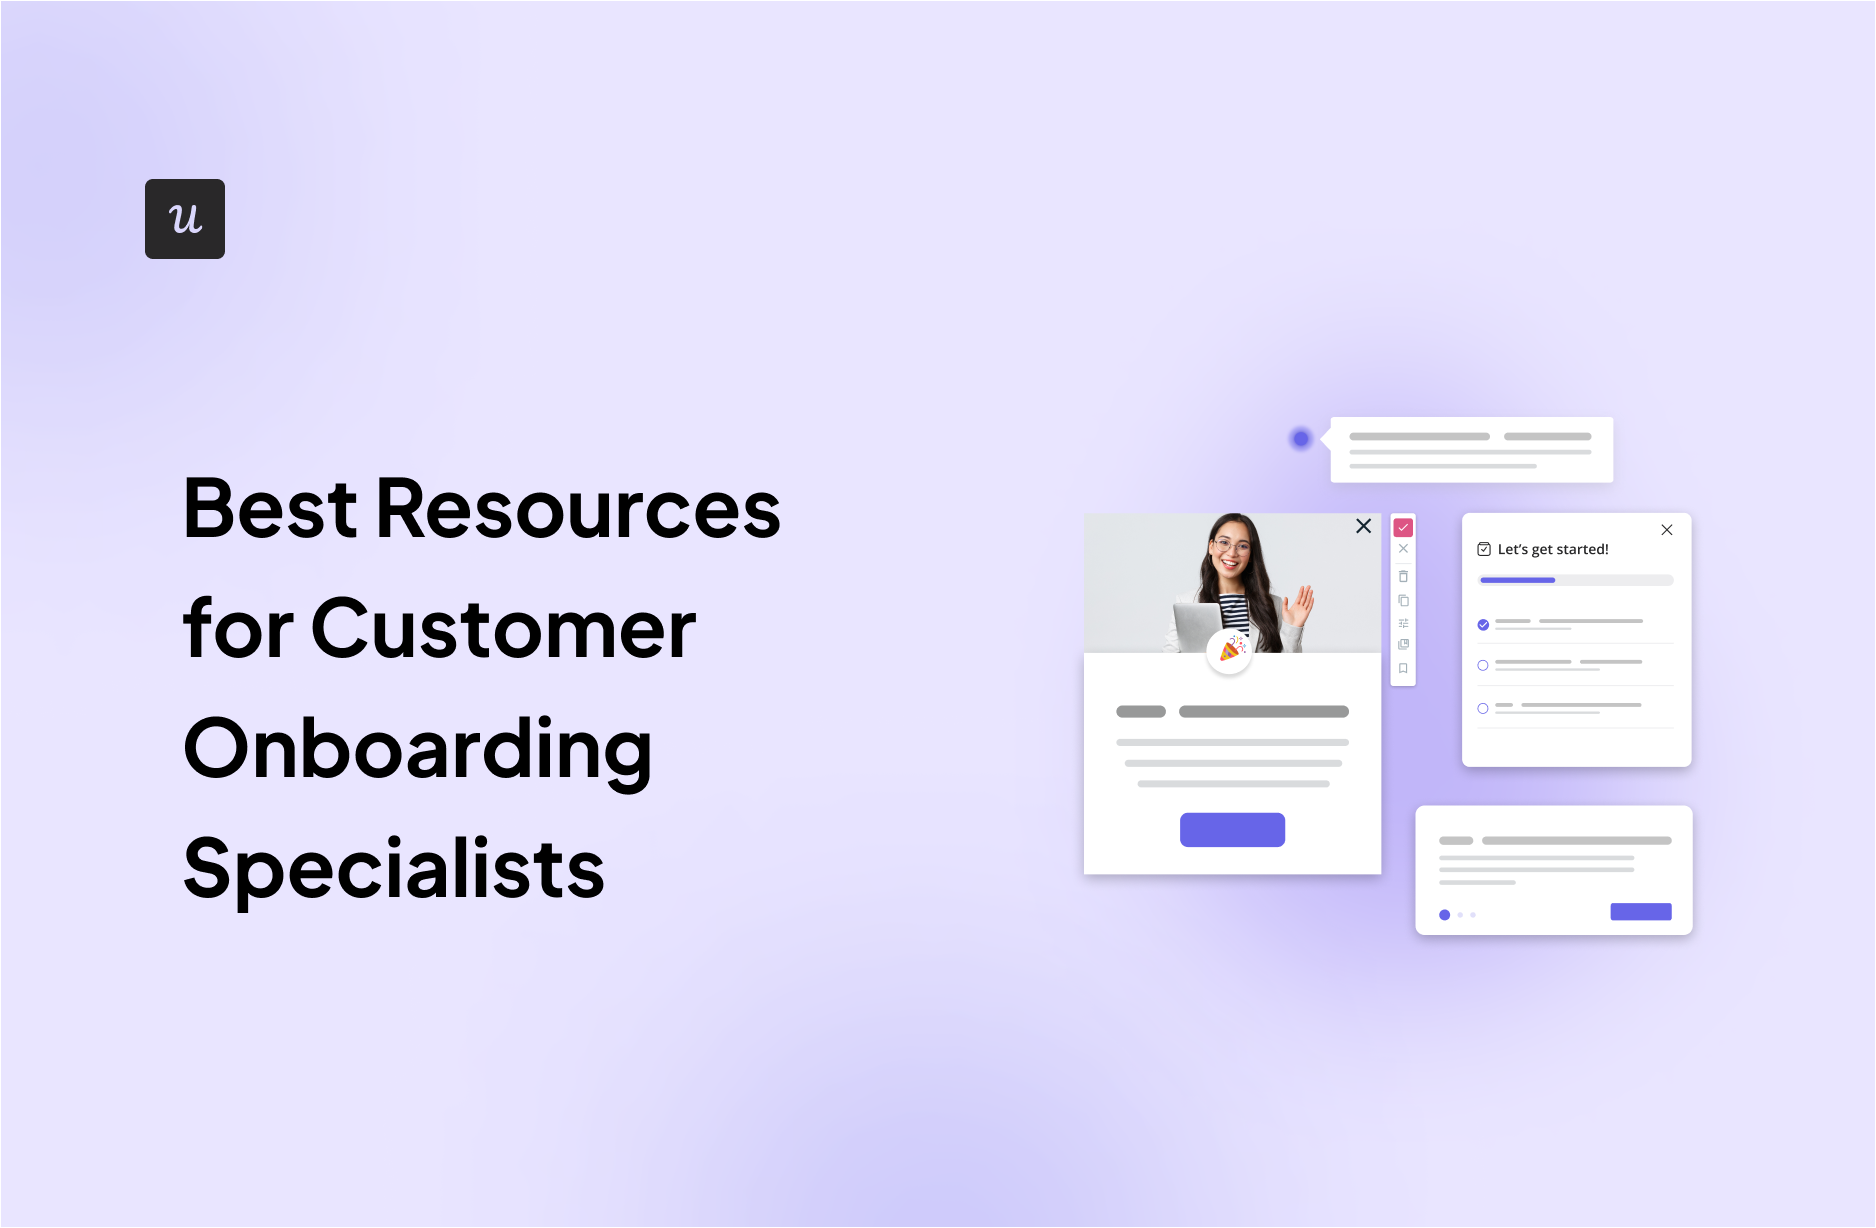 Best Resources for Customer Onboarding Specialists